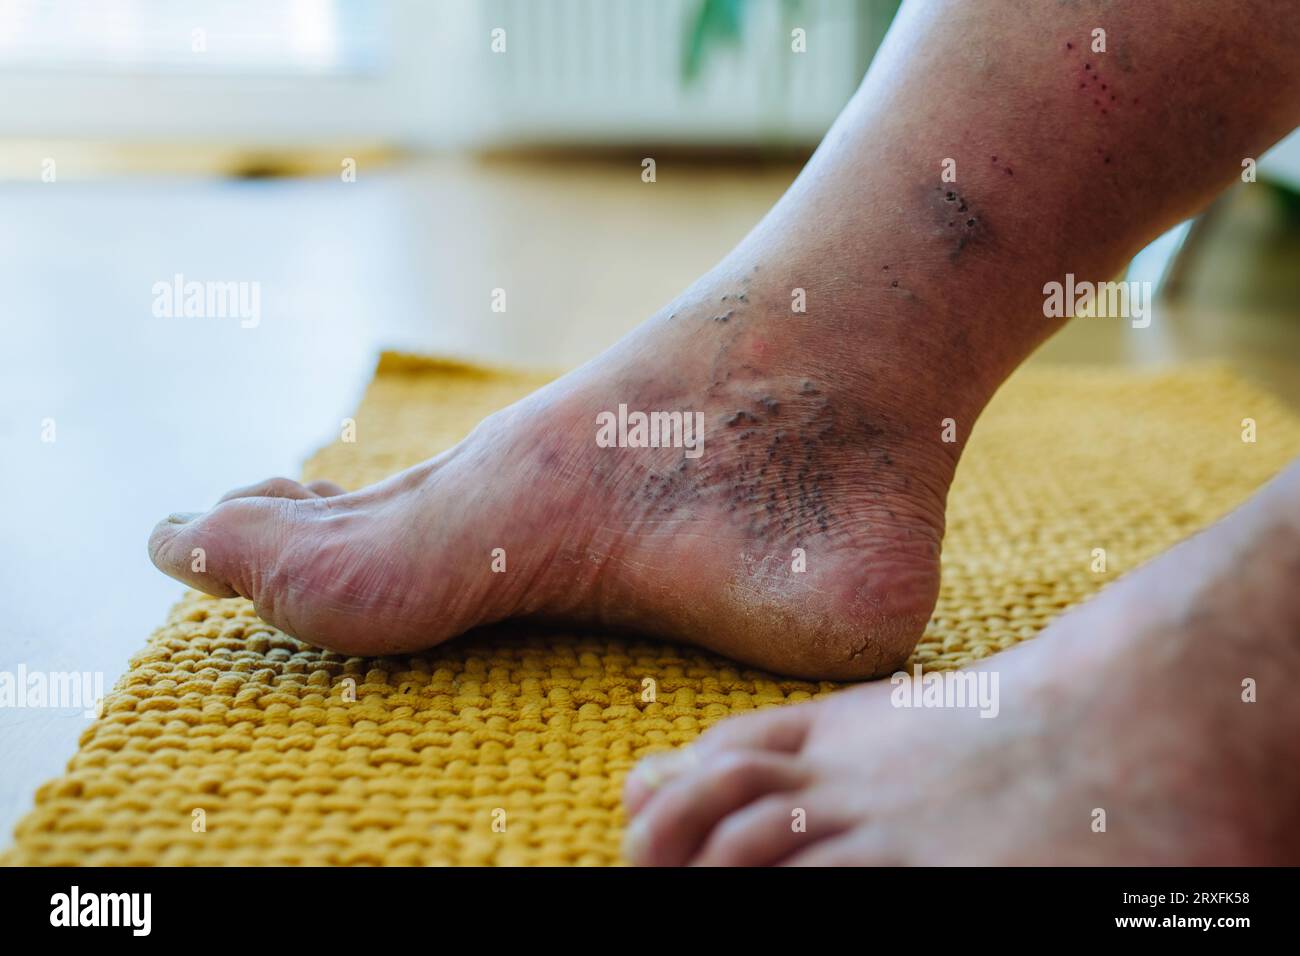 A close-up shot of man's feet with diabetic foot complications. Stock Photo